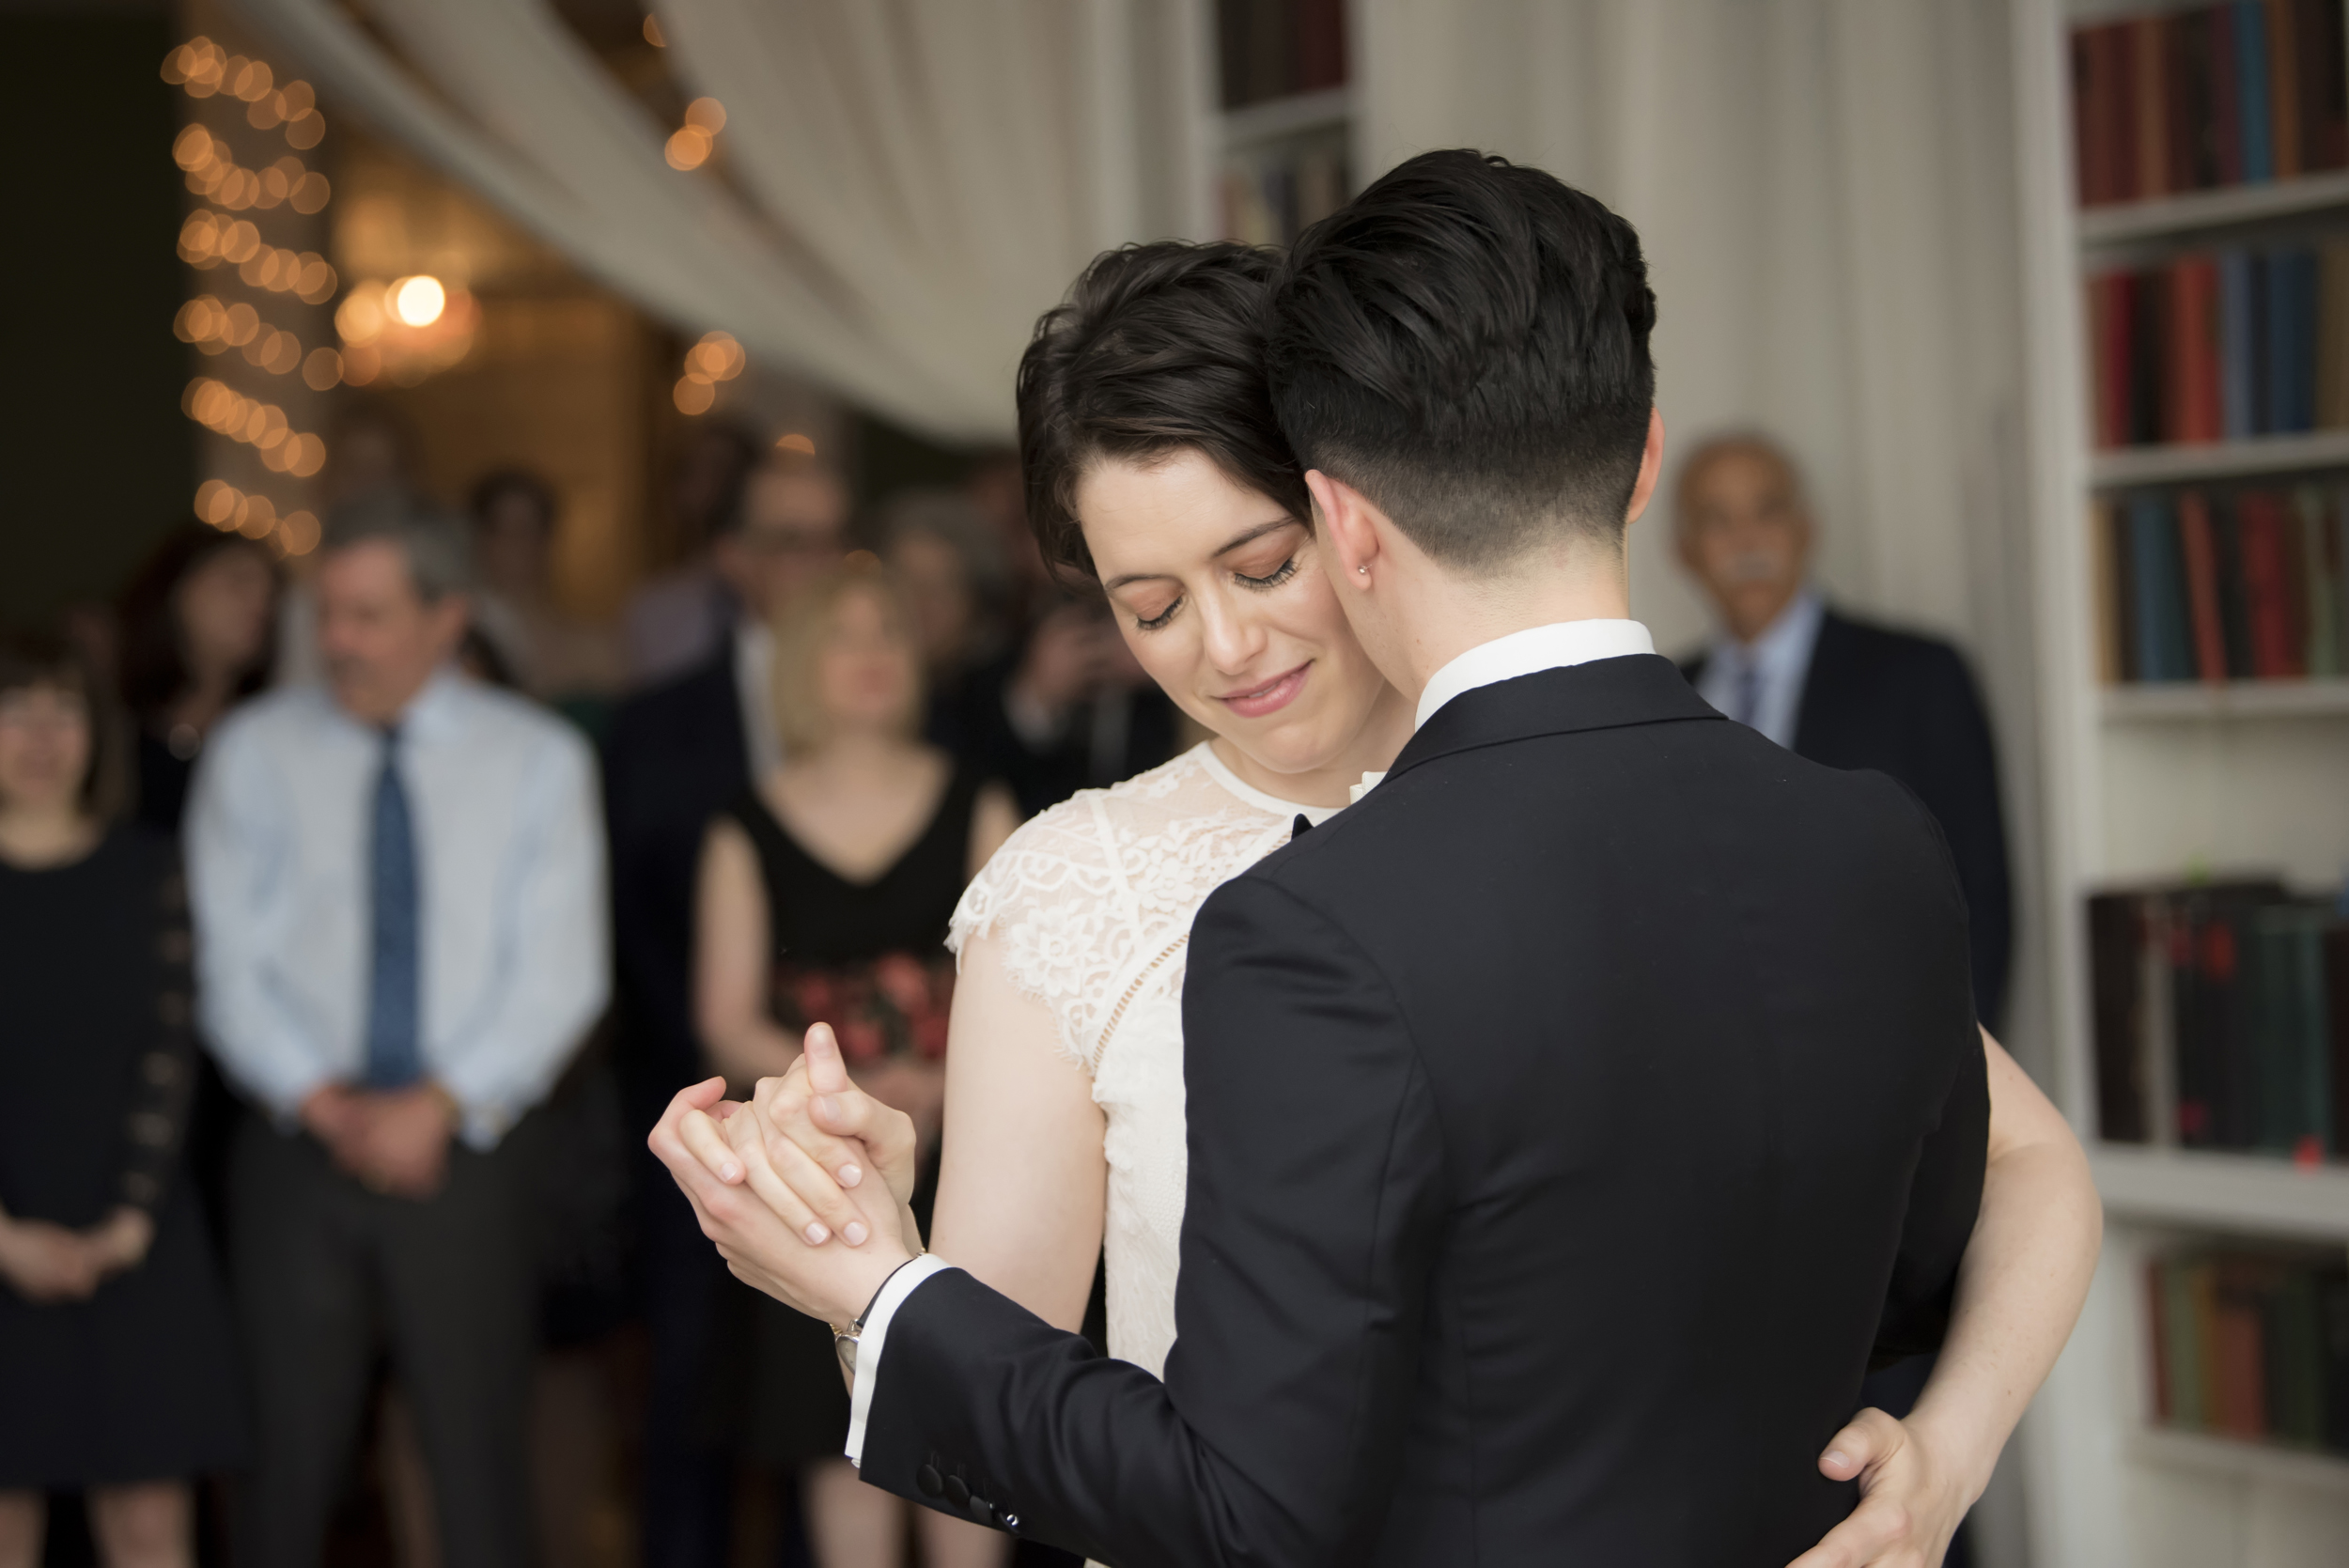 close-up image of a queer wedding couple, one person in a suit and the other in an ivory dress, slow dancing while their guests look on in the background by Studio A Images